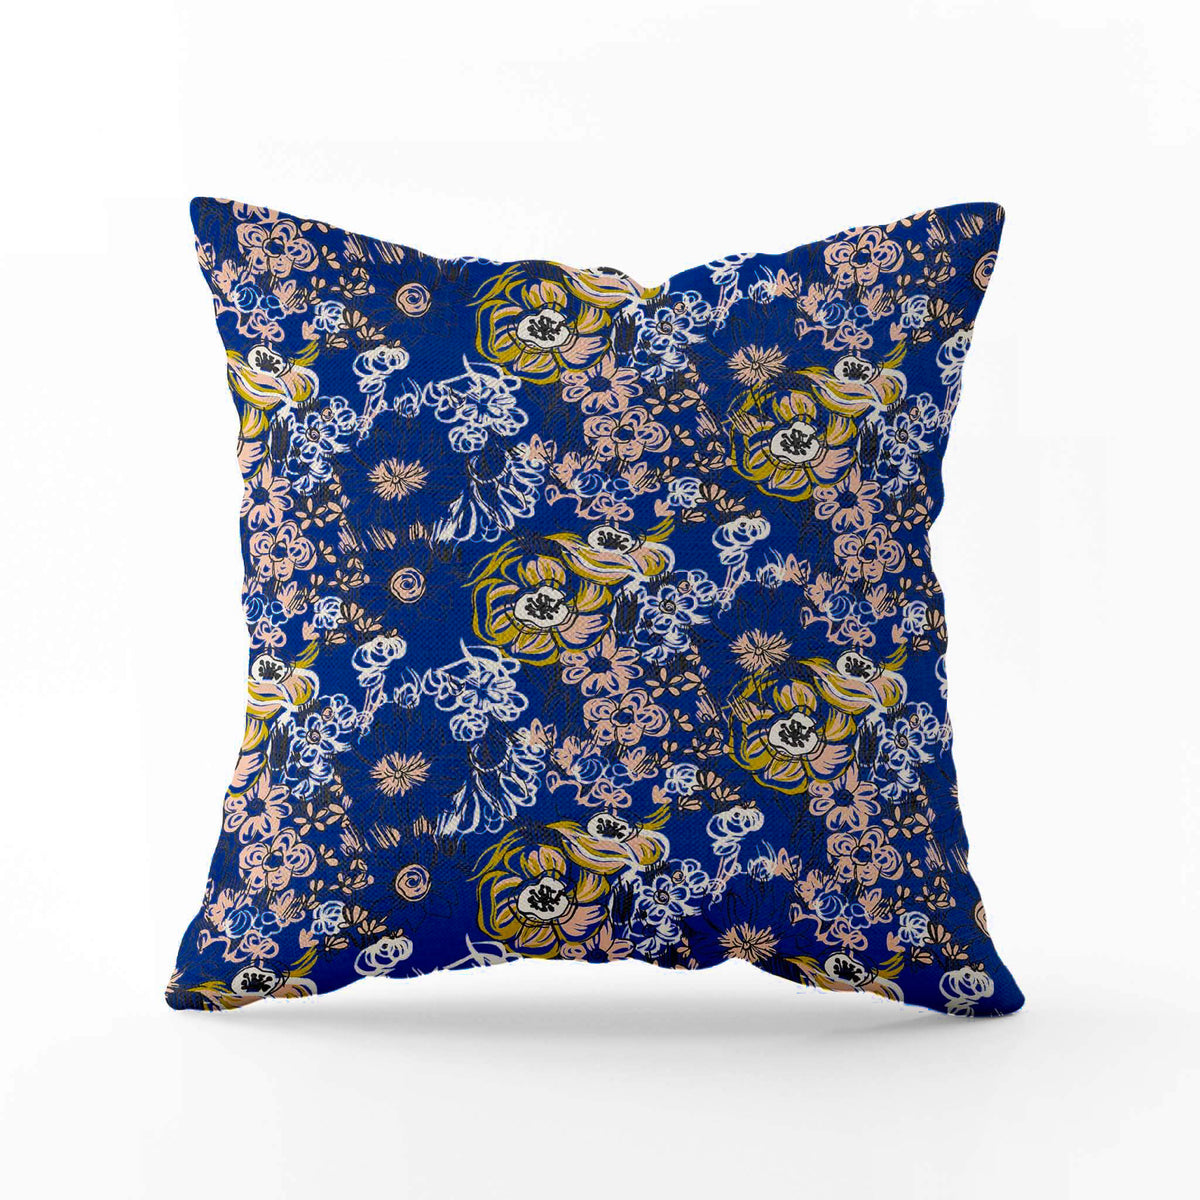 Windy Floral Pillow